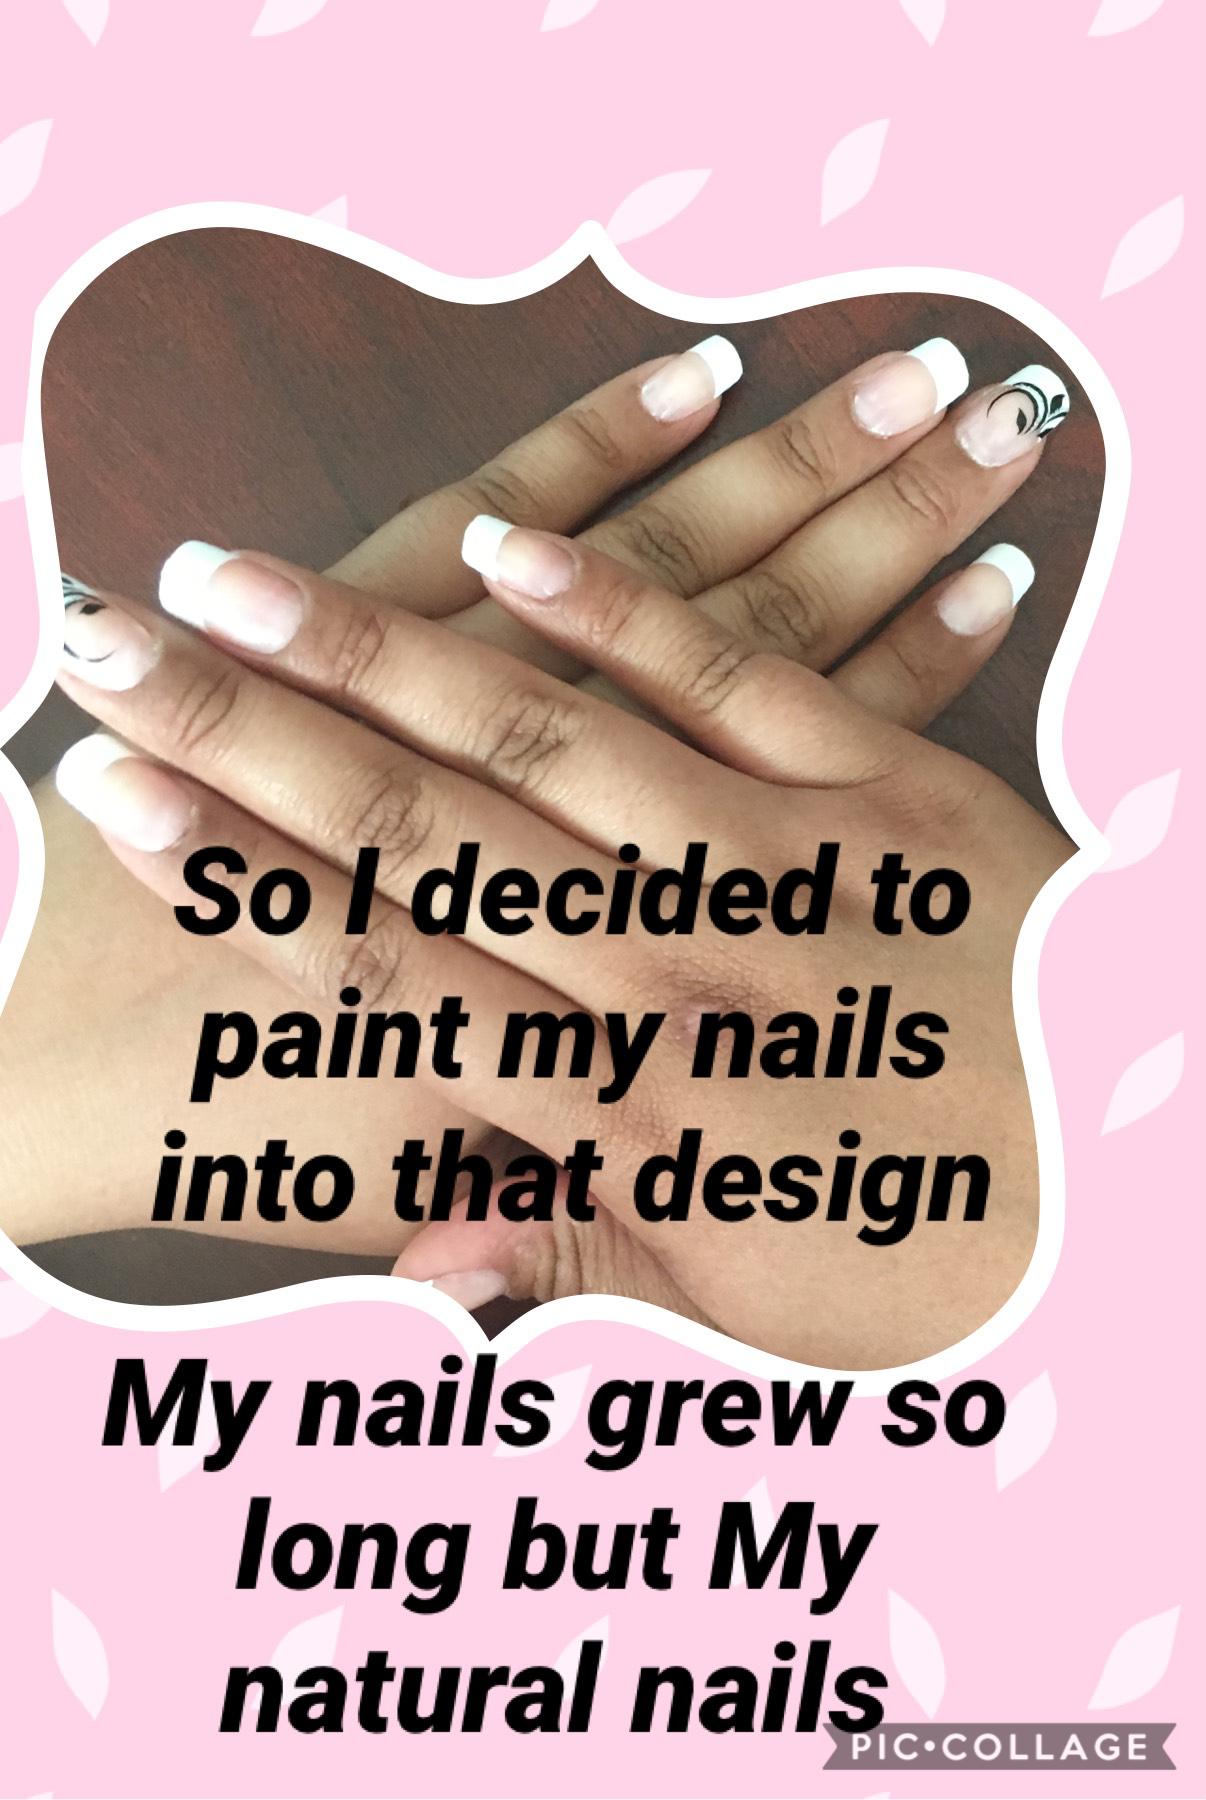 Grew my nail just like I wanted them to be 